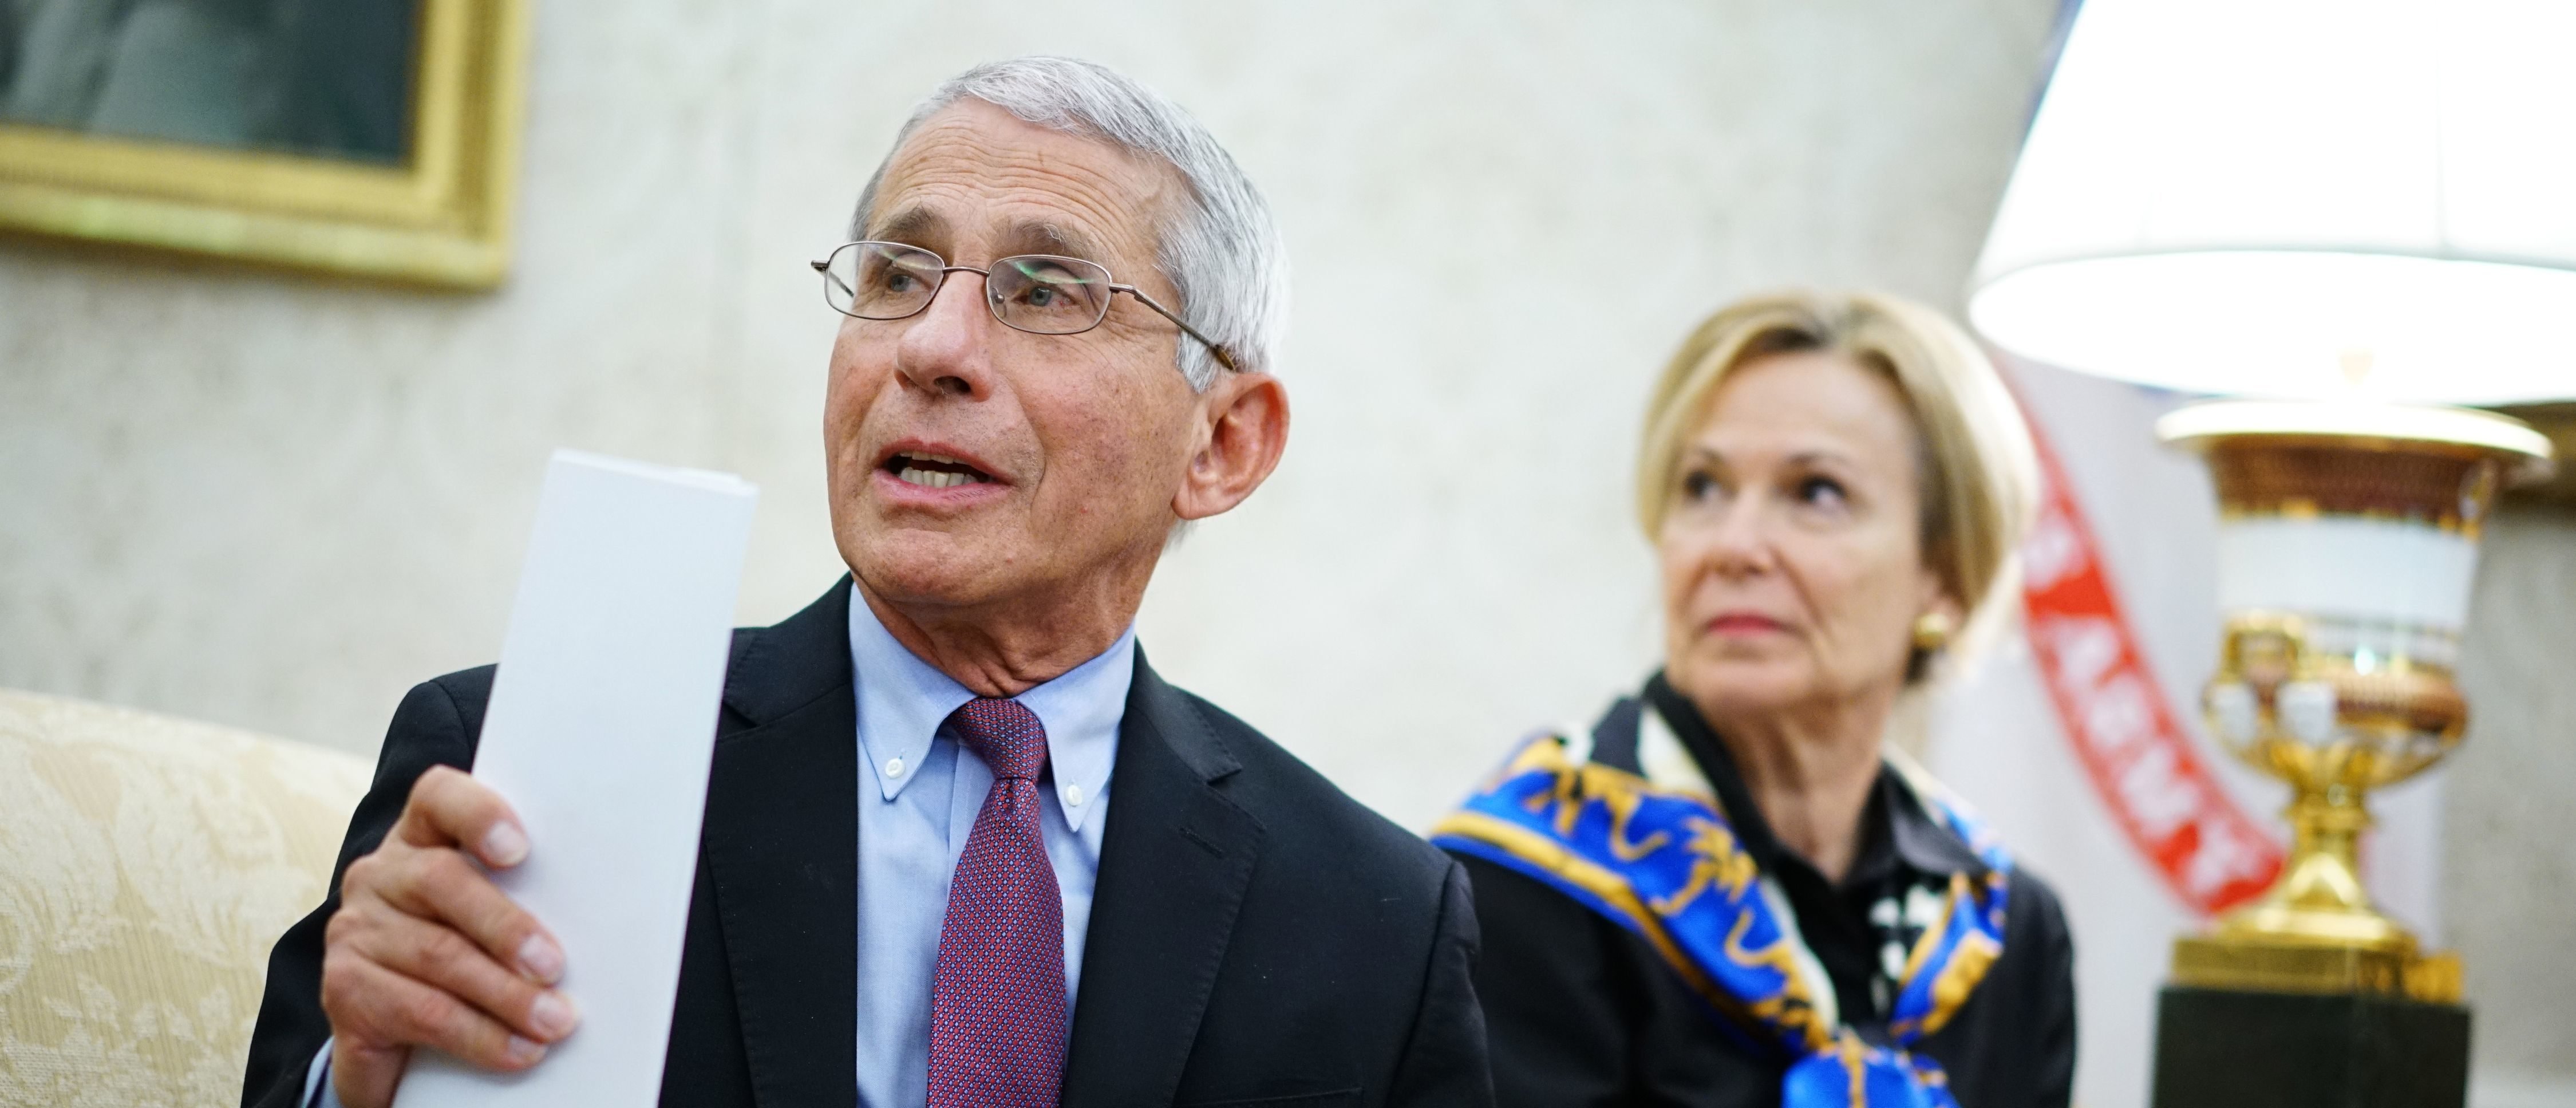 Dr. Anthony Fauci (L), director of the National Institute of Allergy and Infectious Diseases speaks next to Response coordinator for White House Coronavirus Task Force Deborah Birx, during a meeting with US President Donald Trump and Louisiana Governor John Bel Edwards D-LA in the Oval Office of the White House in Washington, DC on April 29, 2020. (Photo by MANDEL NGAN/AFP via Getty Images)